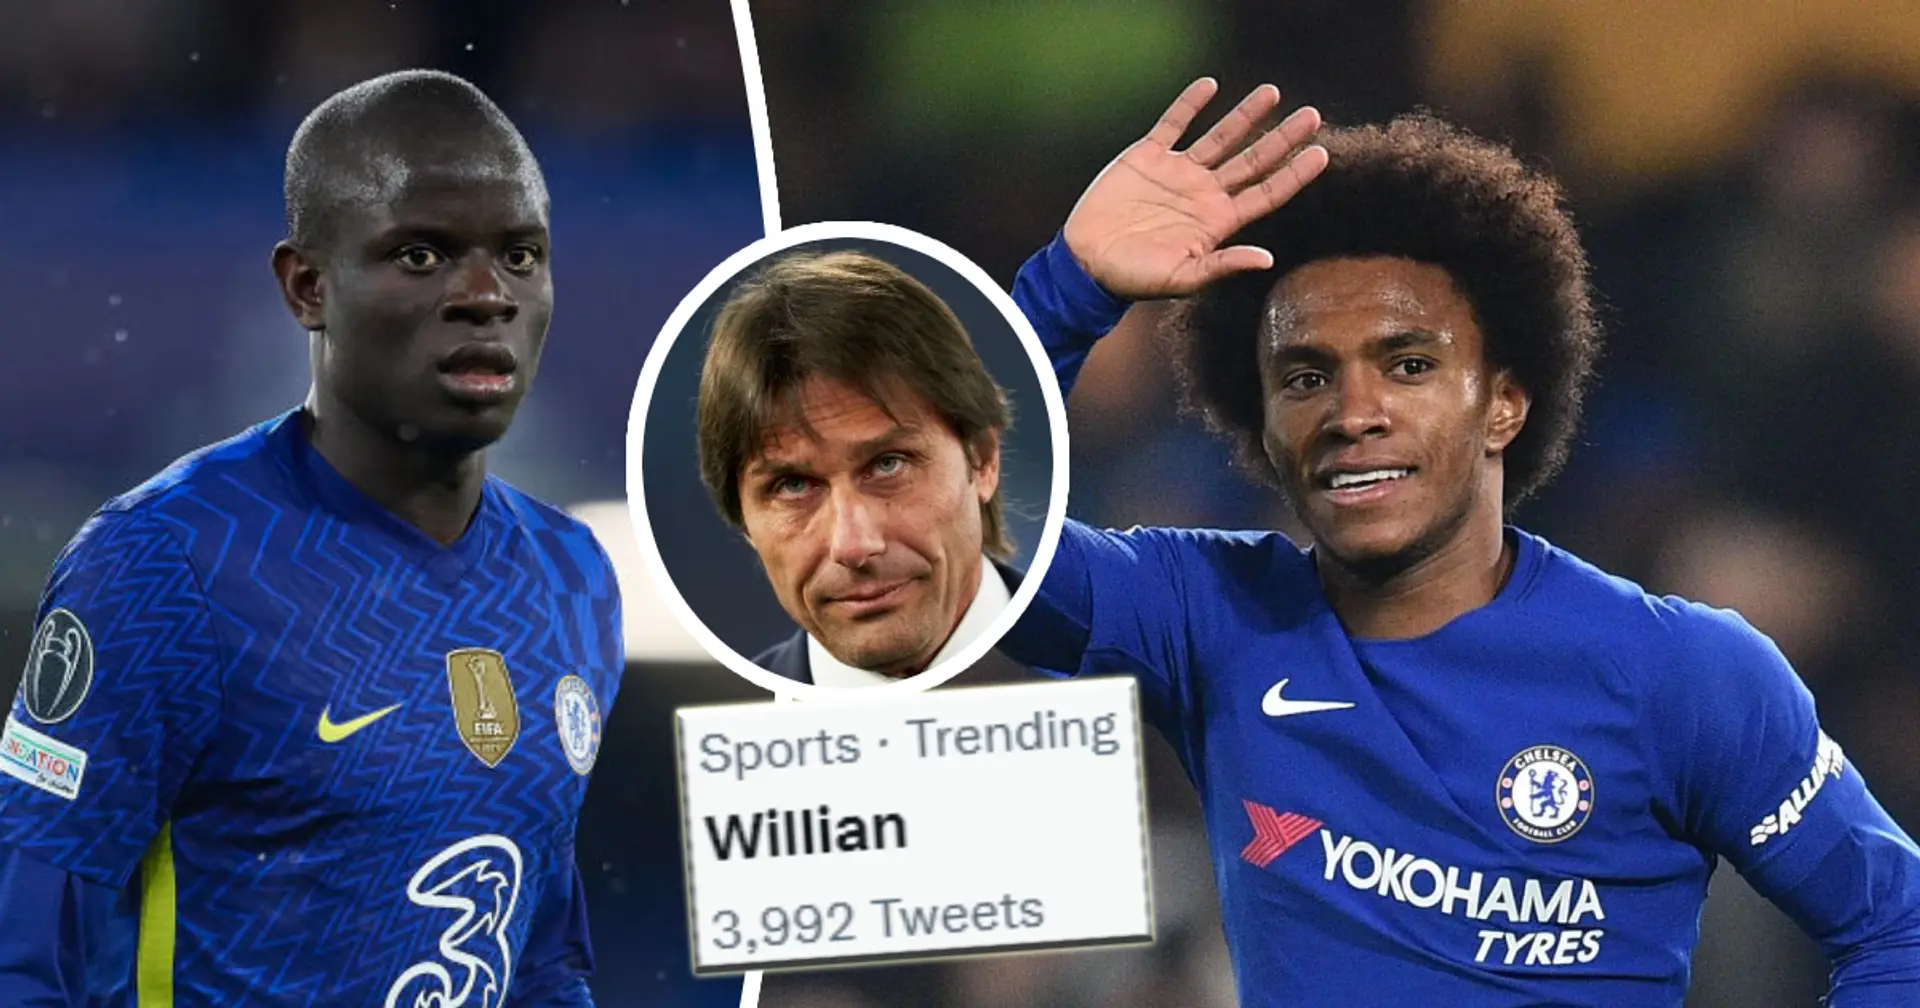 Why is Willian trending on Twitter and what do N'Golo Kante and Spurs have to do with it? Explained